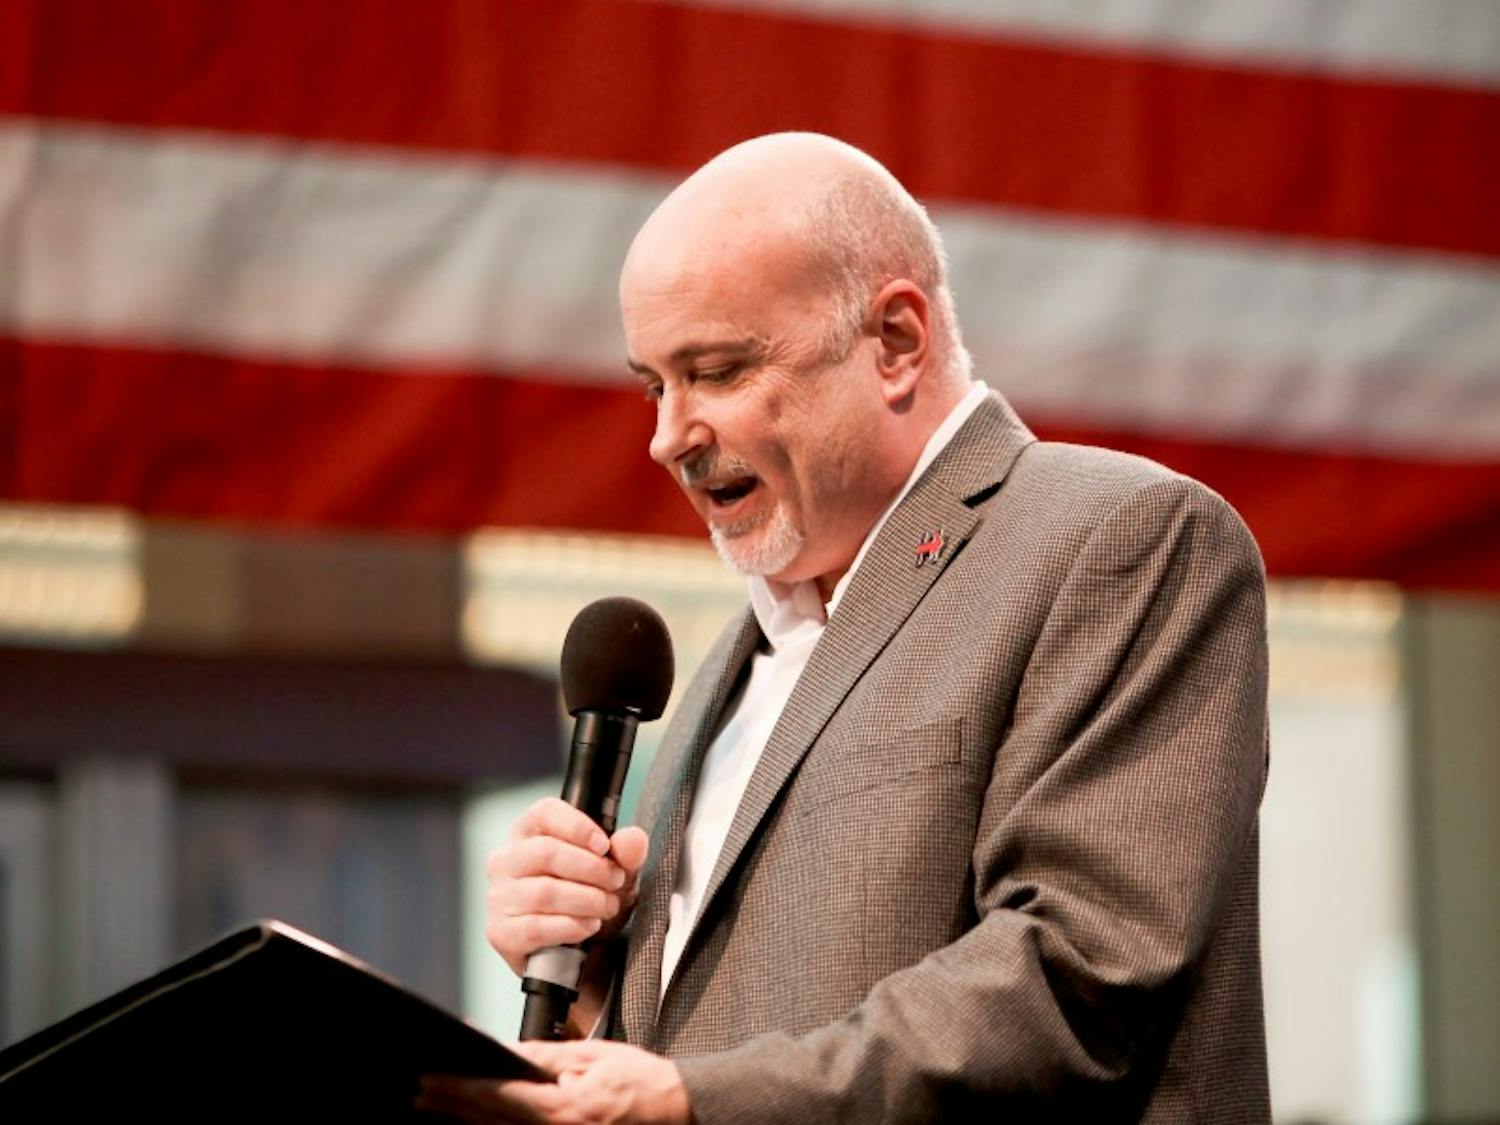 U.S Rep. Mark Pocan, D-Wis., was one of three members of Wisconsin’s Congressional delegation to petition the U.S. Department of Justice Wednesday to monitor elections in Wisconsin.